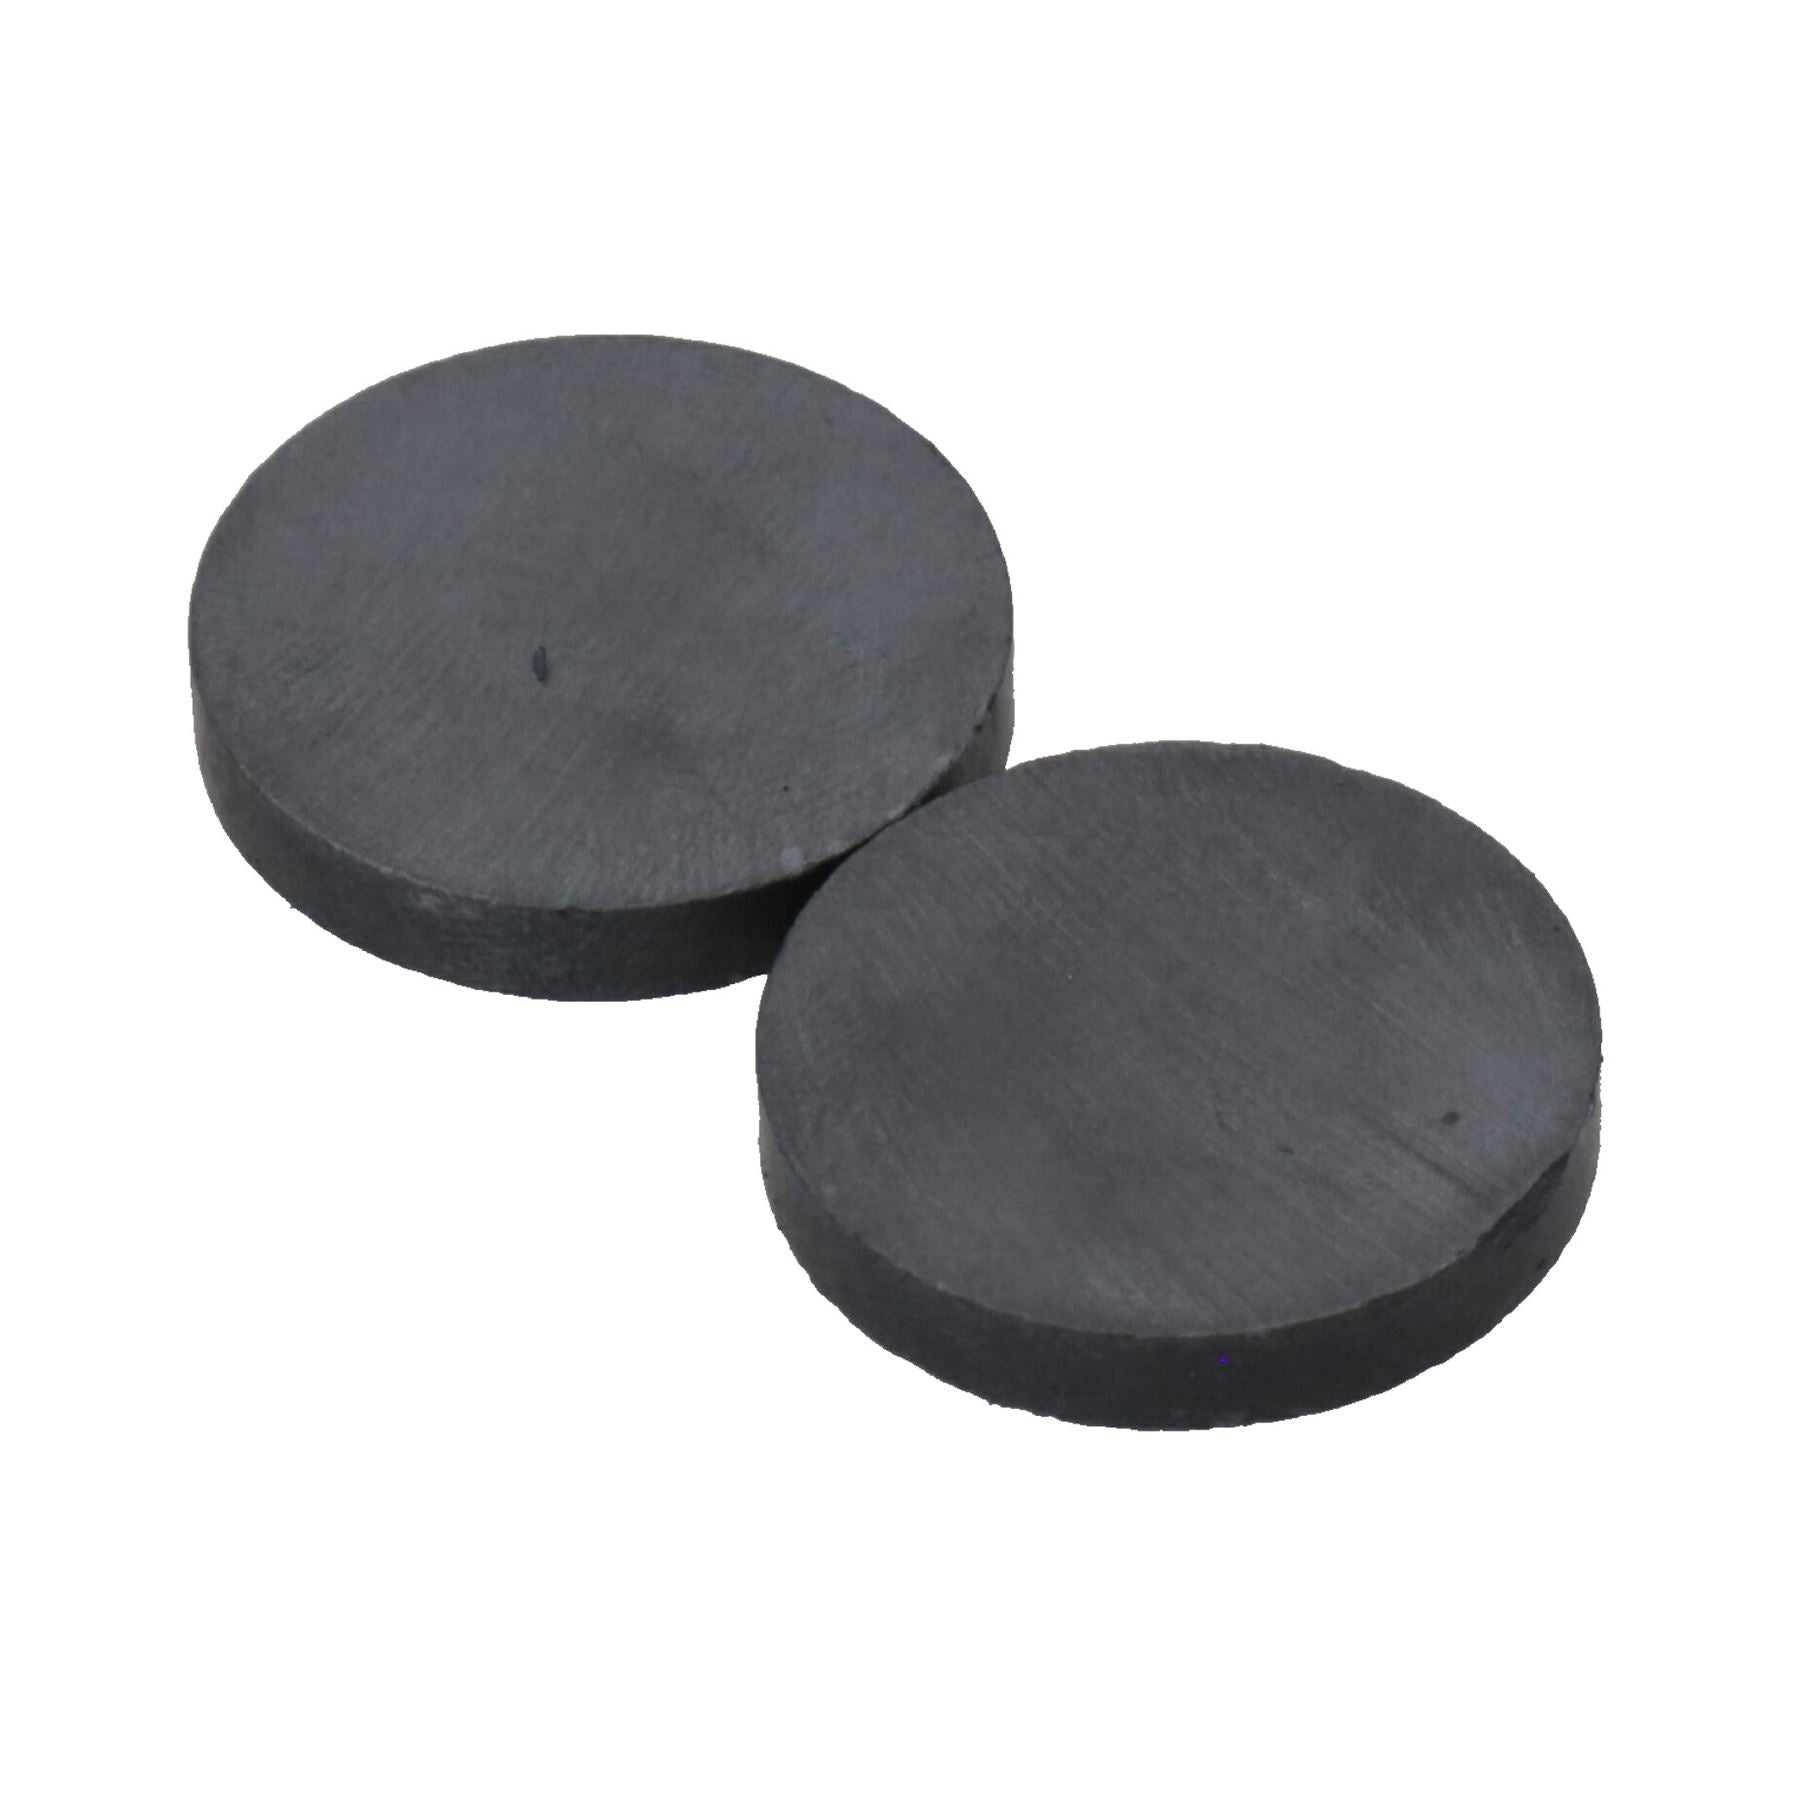 Ceramic Ferrite Circular Round Disc Magnets 25mm x 4mm for Home Office